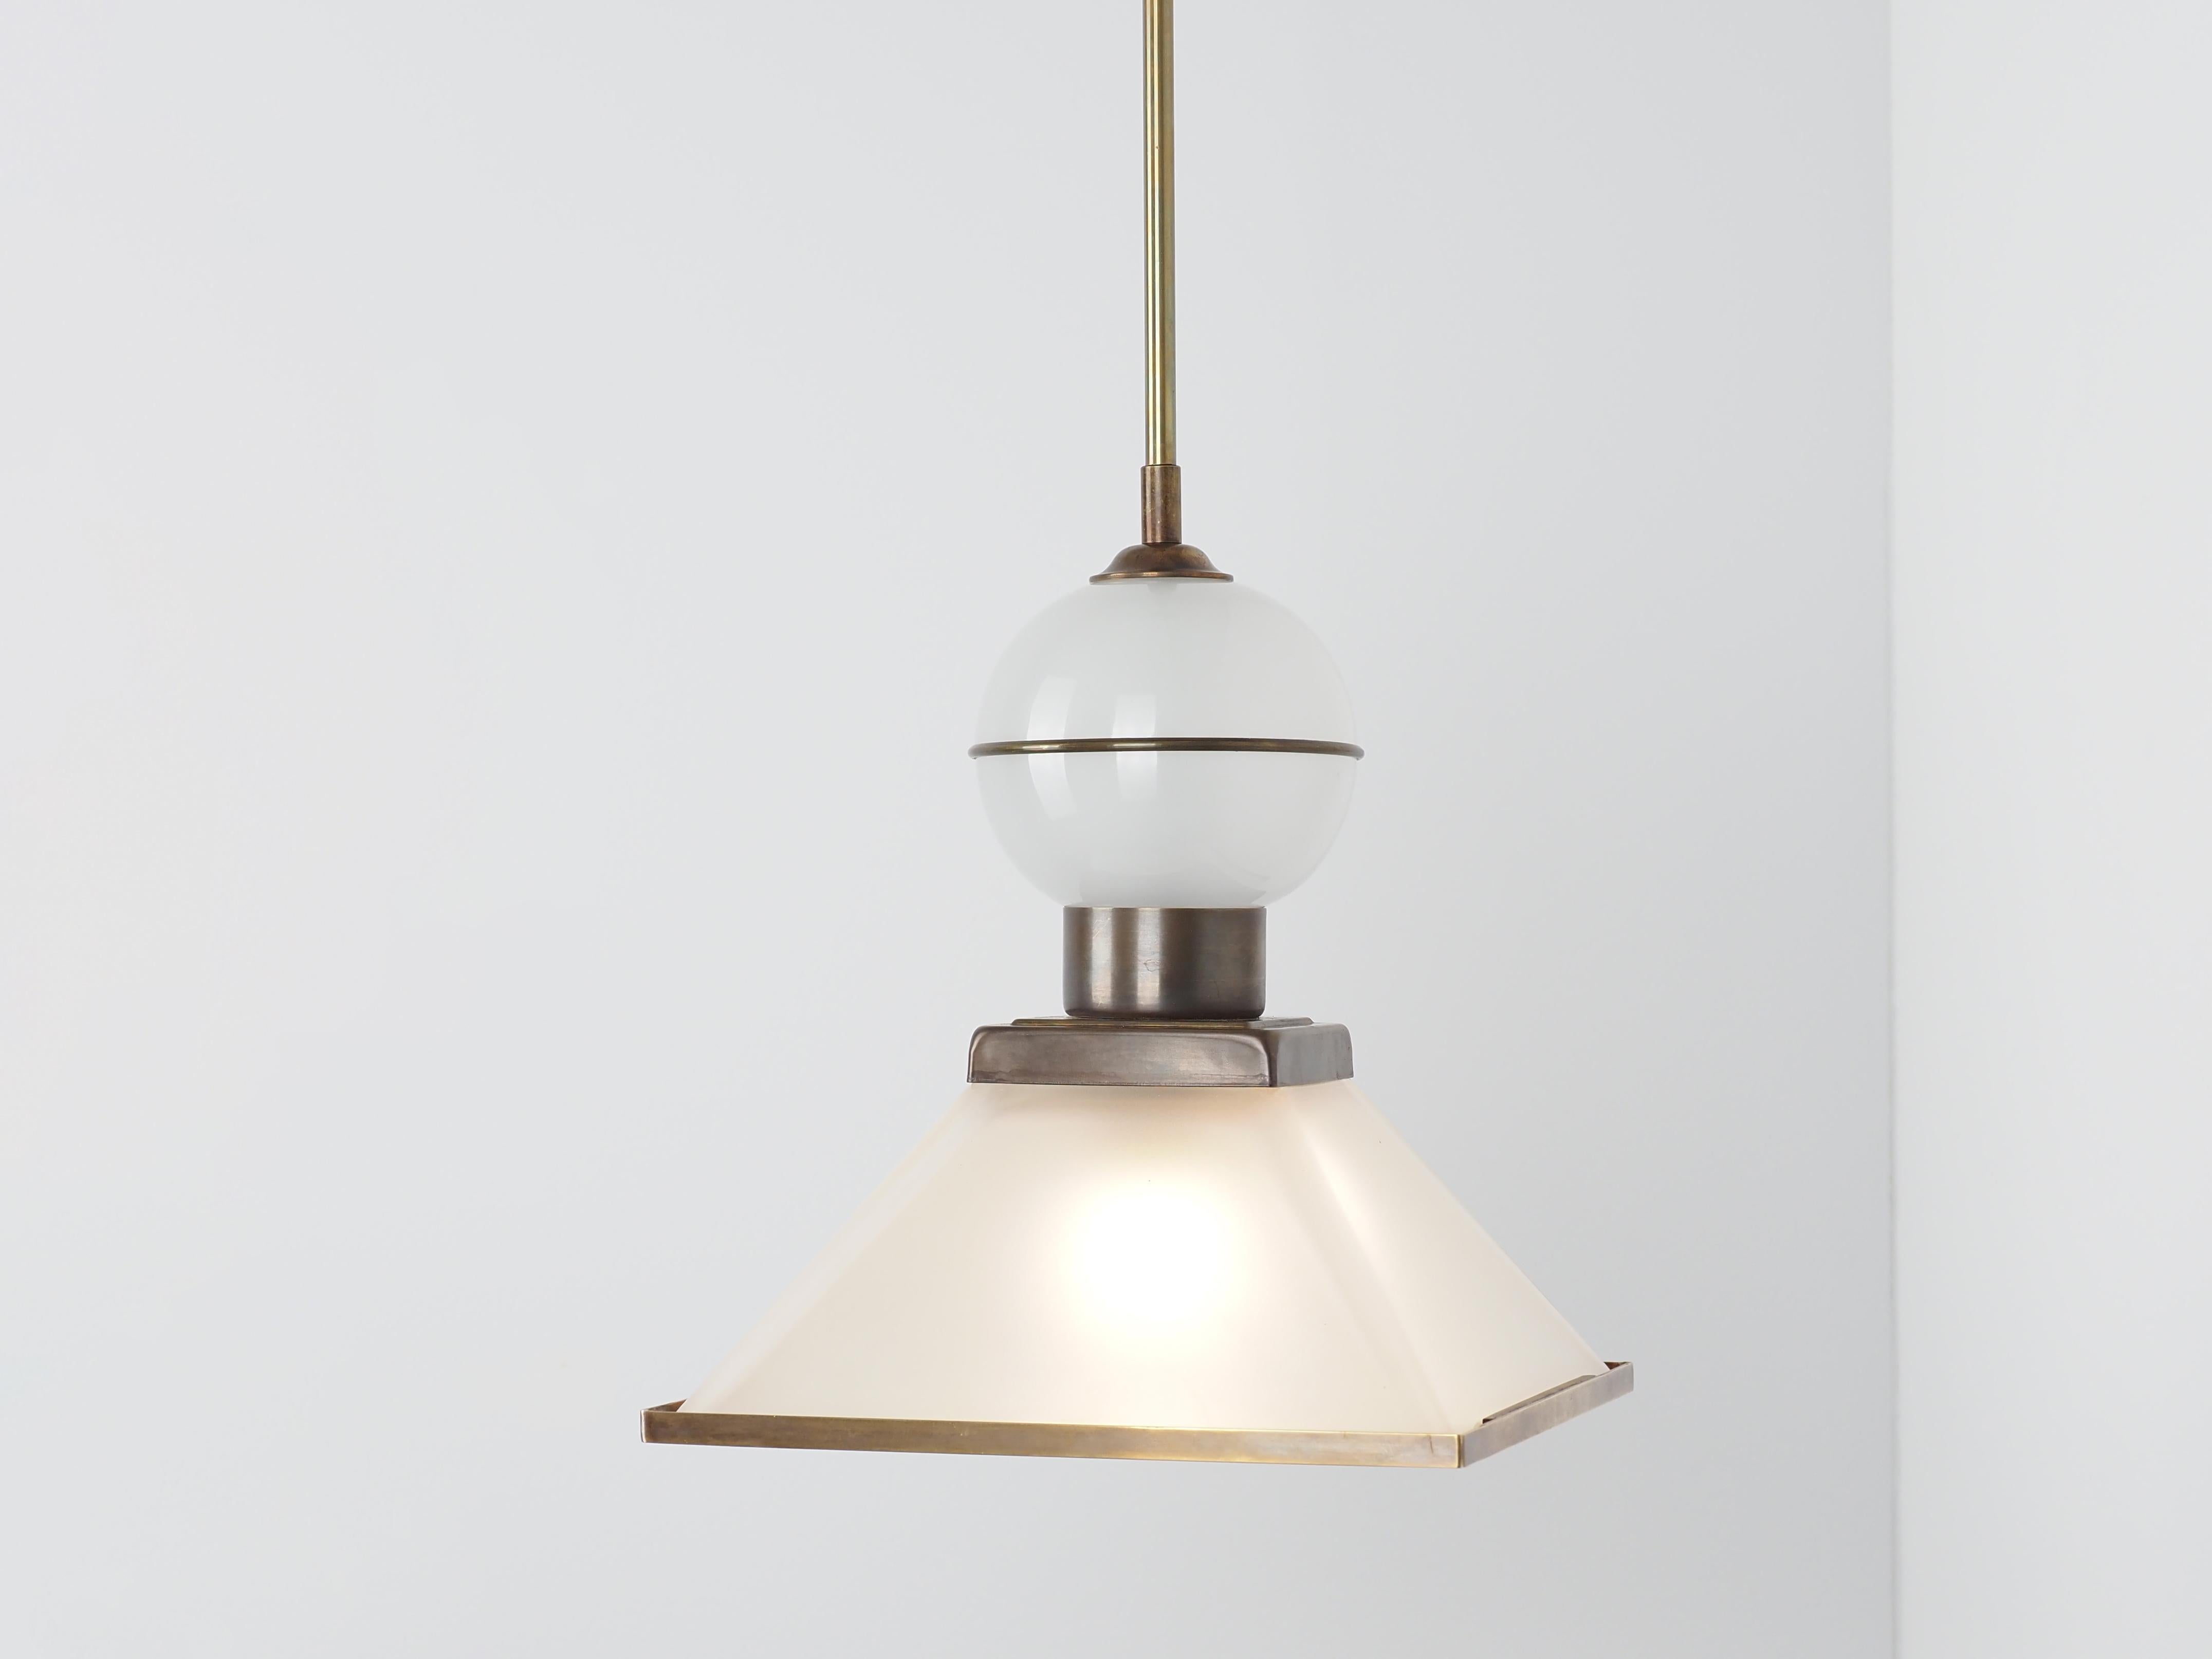 Contemporary Italian pair frosted glass pendants
Pyramid shape with round white glass finial
Brass trim at the bottom square, center and in the middle of the round finial.
Overall height 37.5